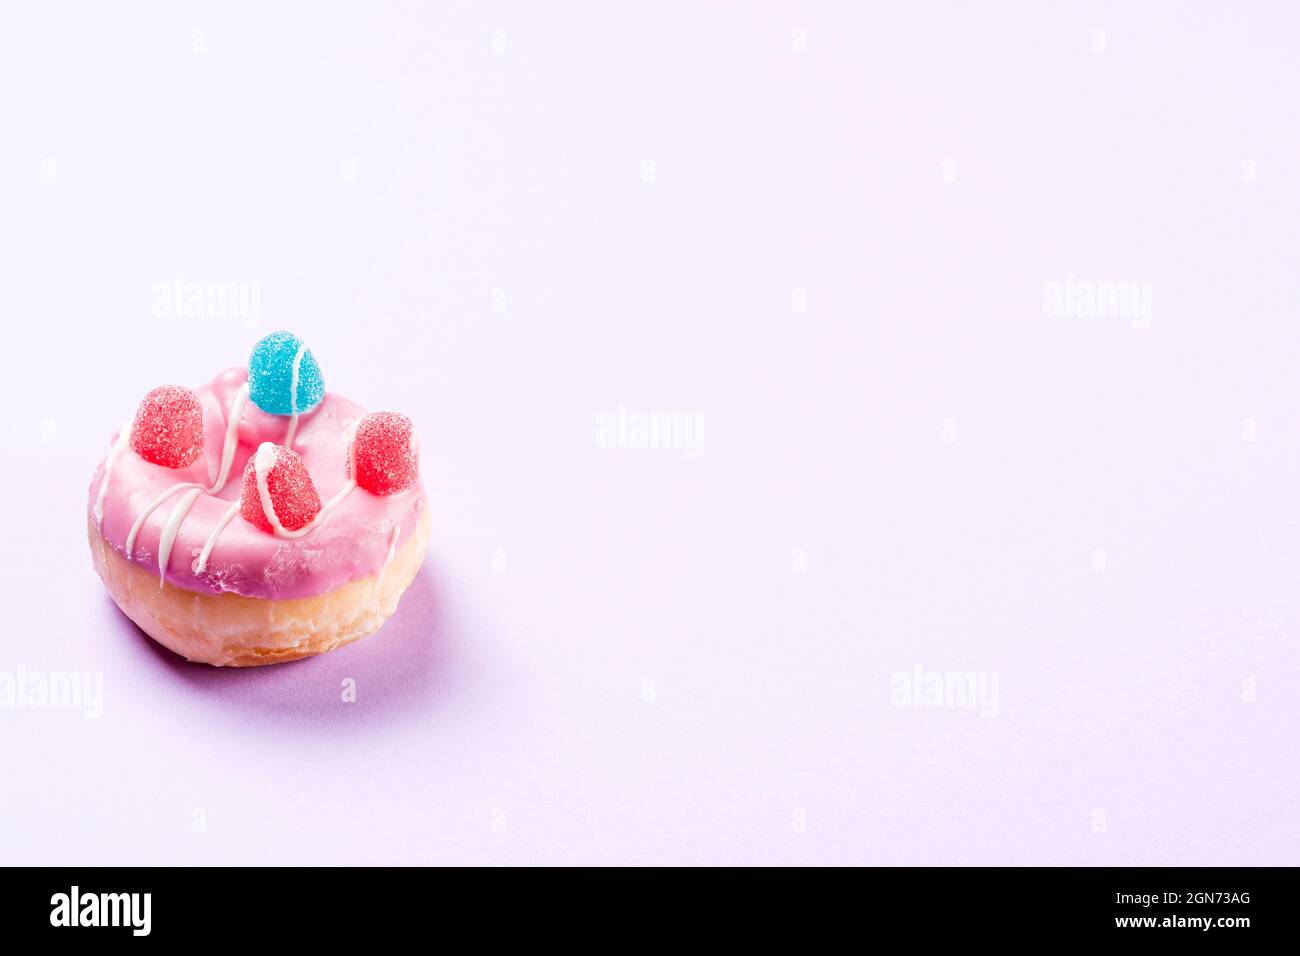 Photograph of 1 pink donuts decorated with jelly beans and drawn with white chocolate.The photo is taken in horizontal format on a lilac background an Stock Photo